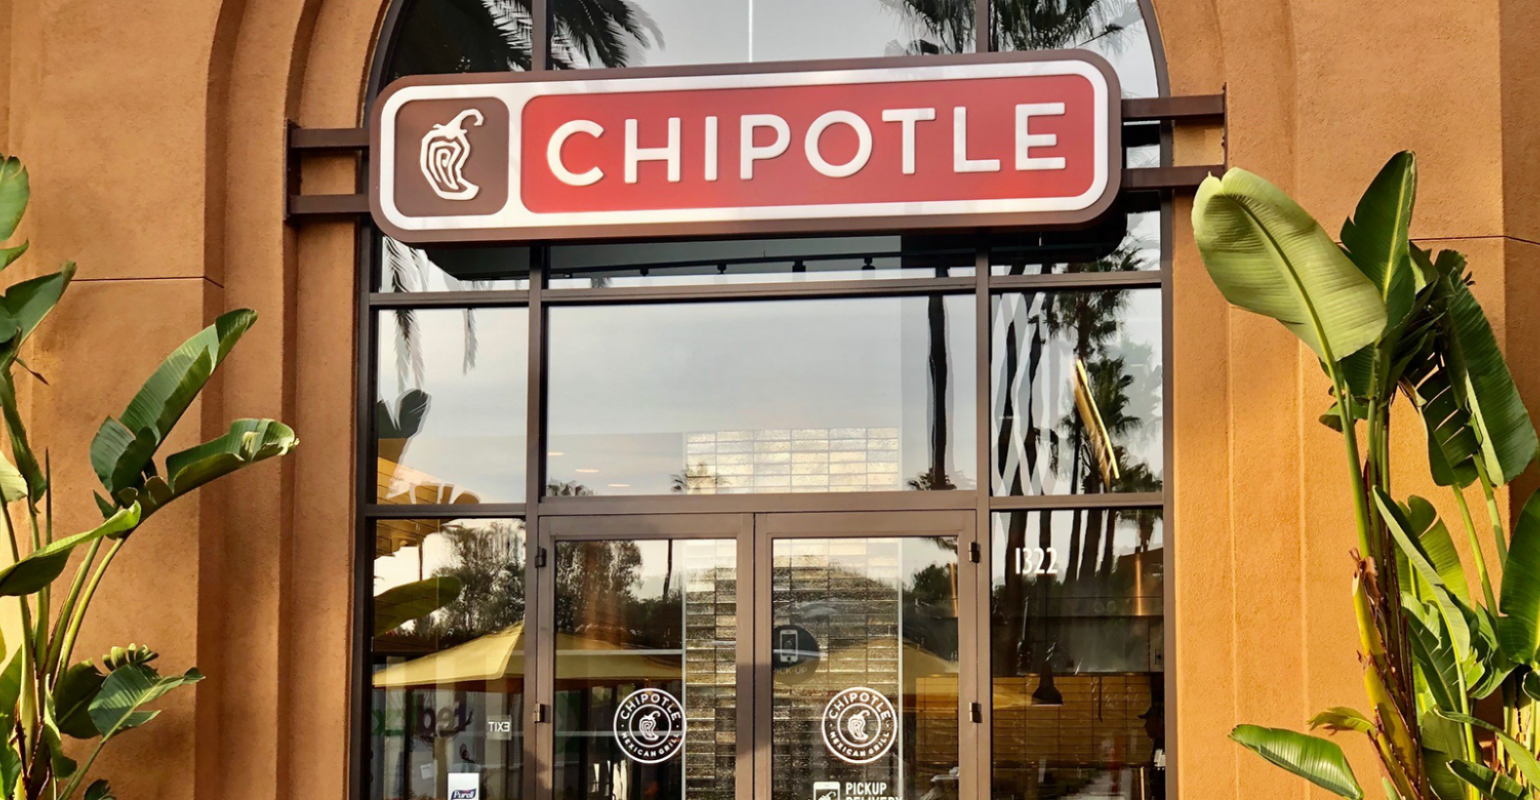 Chipotle opens new corporate office in Columbus Nation's Restaurant News